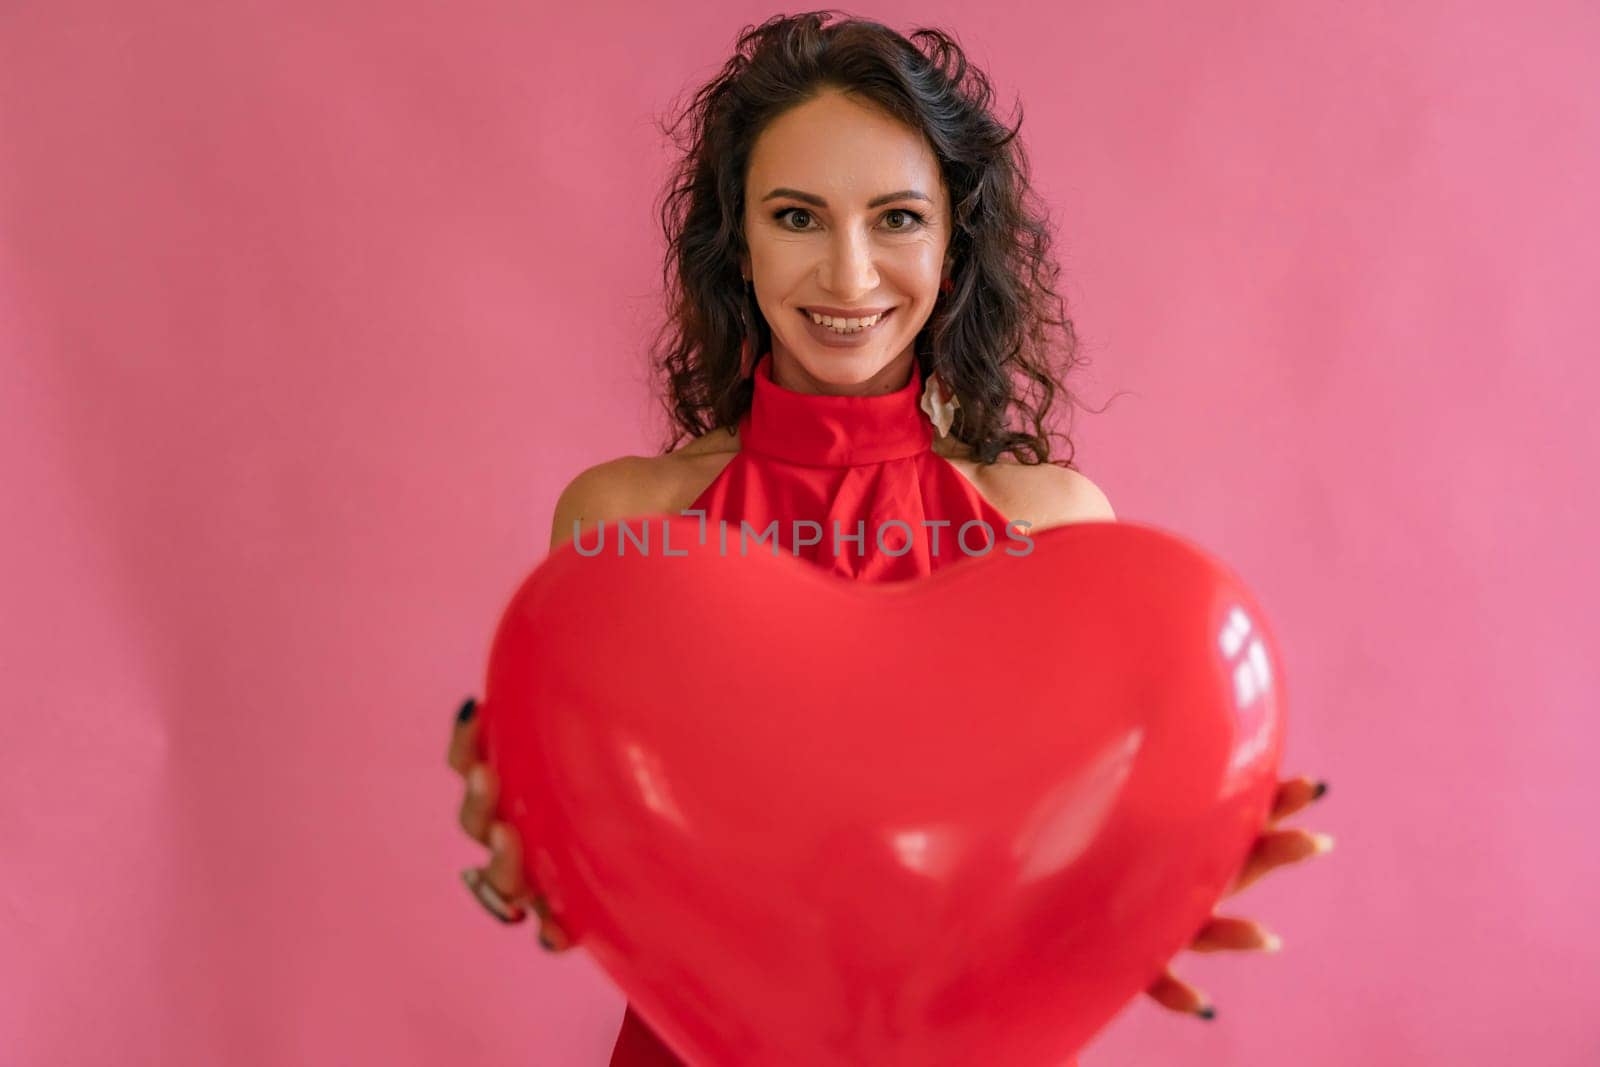 A woman is holding a red heart balloon. She is smiling and she is happy. Concept of joy and love, as the heart symbolizes affection and warmth